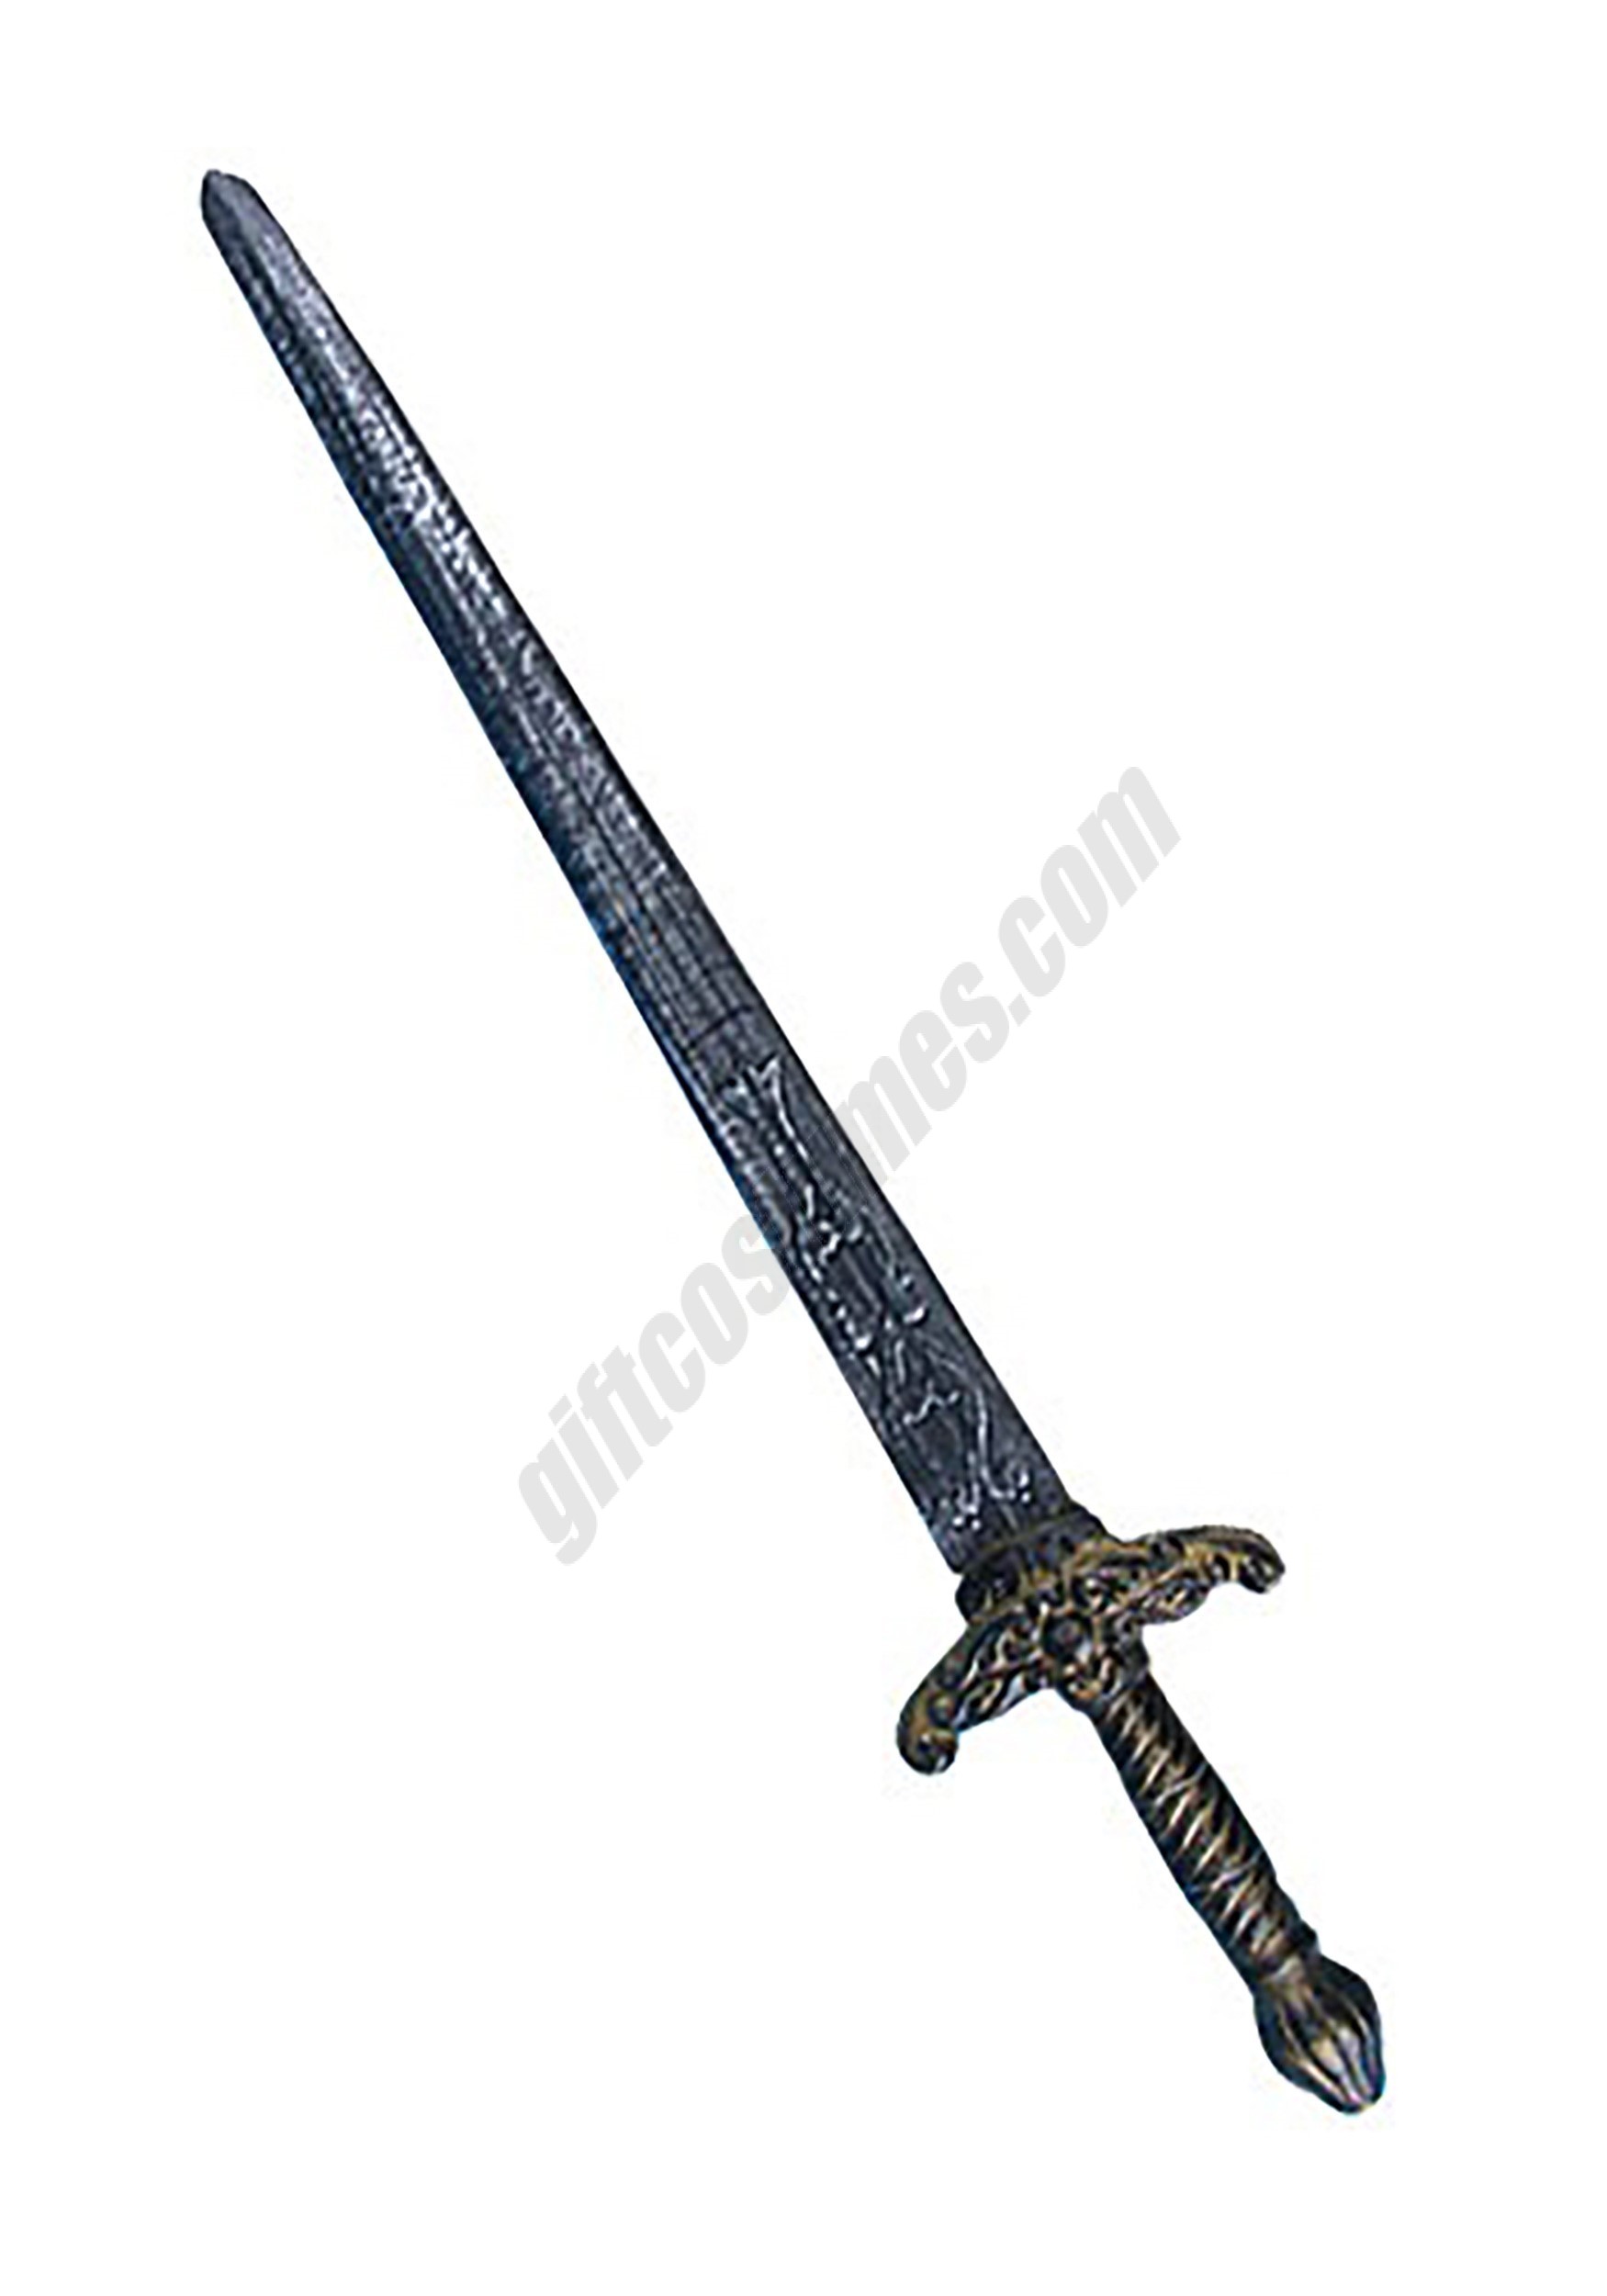 Sword Accessory Promotions - Sword Accessory Promotions